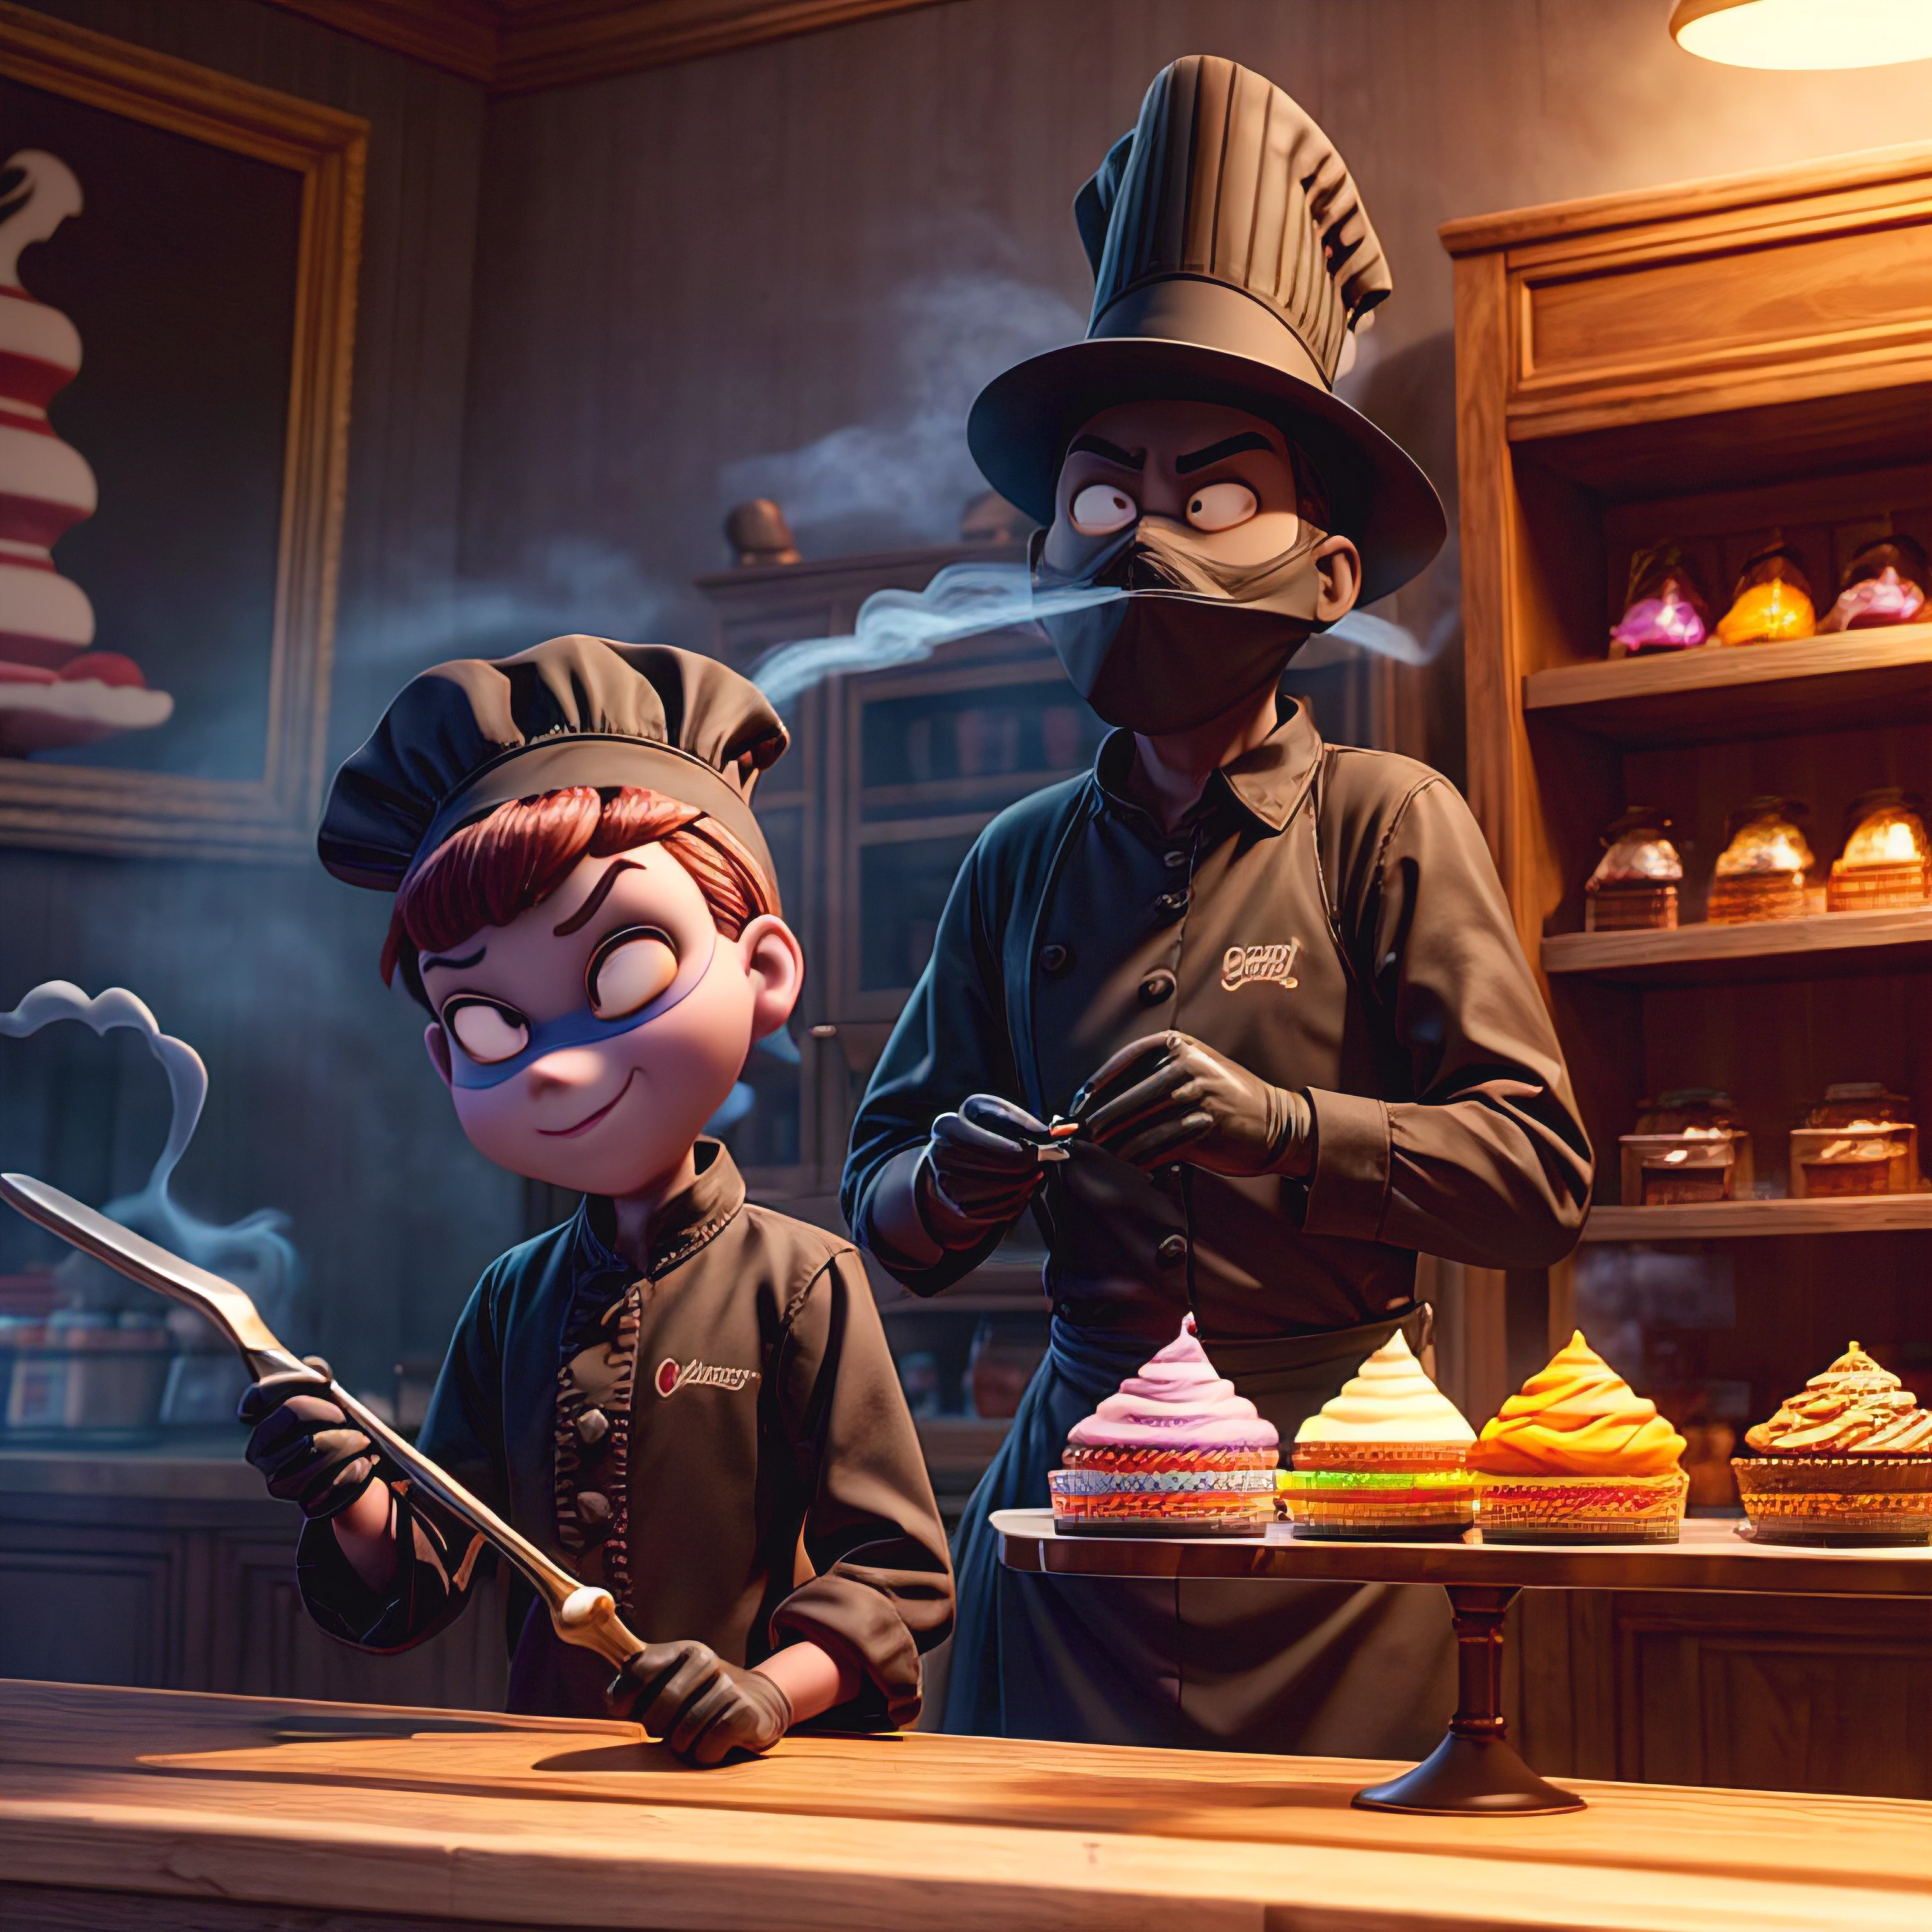 pixAr style, A (shAdowy smoke monster) posing As A (Konditor) behind A register on A counter in A cAndy shop, chef-hAt, (low Angle), detAiled, hohe Auflösung, high quAlity, 8k, high sAturAtion, bedrohlich, hiding in plAin sight